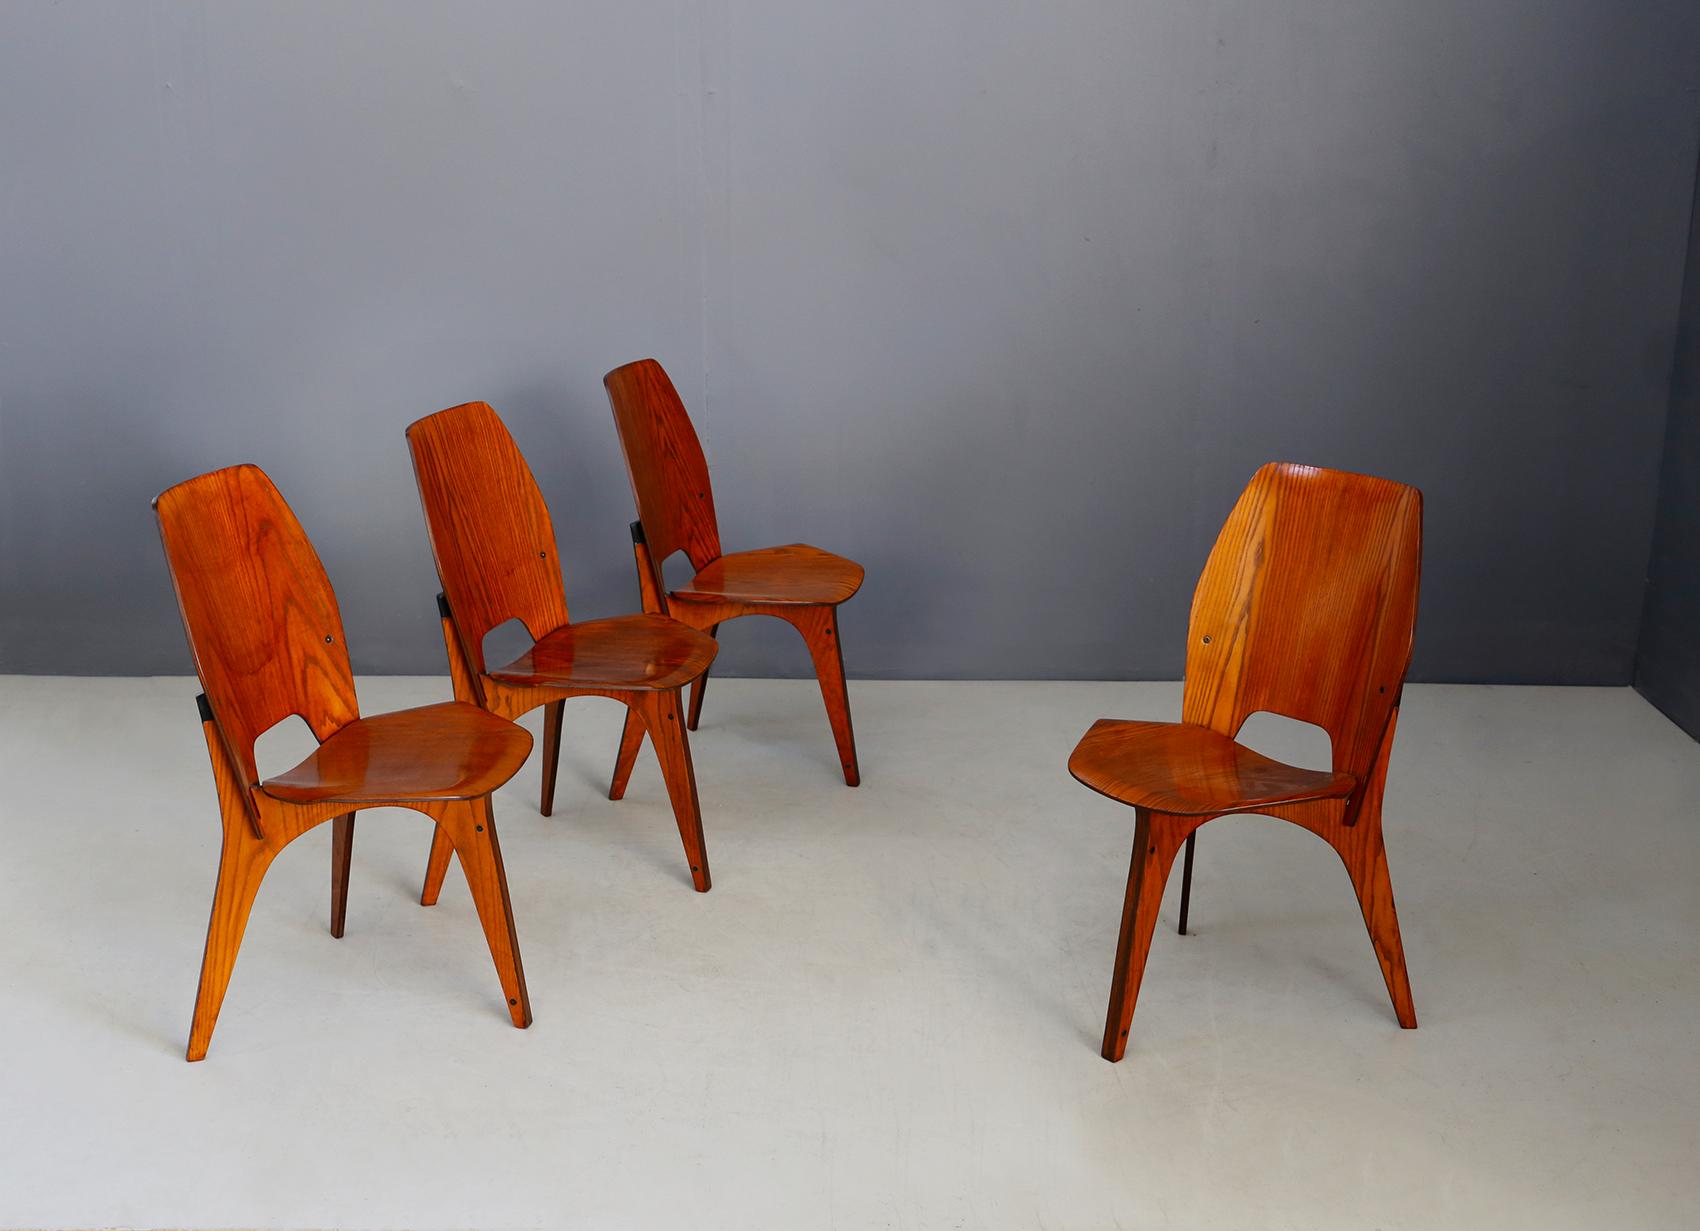 Rare chairs designed by Eugenio Gerli for the Tecno manufactory circa 1958.
The chairs are made of teak plywood. Manufactured by Tecno, Italy. Their great rarity and peculiarity is its interlocking game made with wood. Given the joints you can see